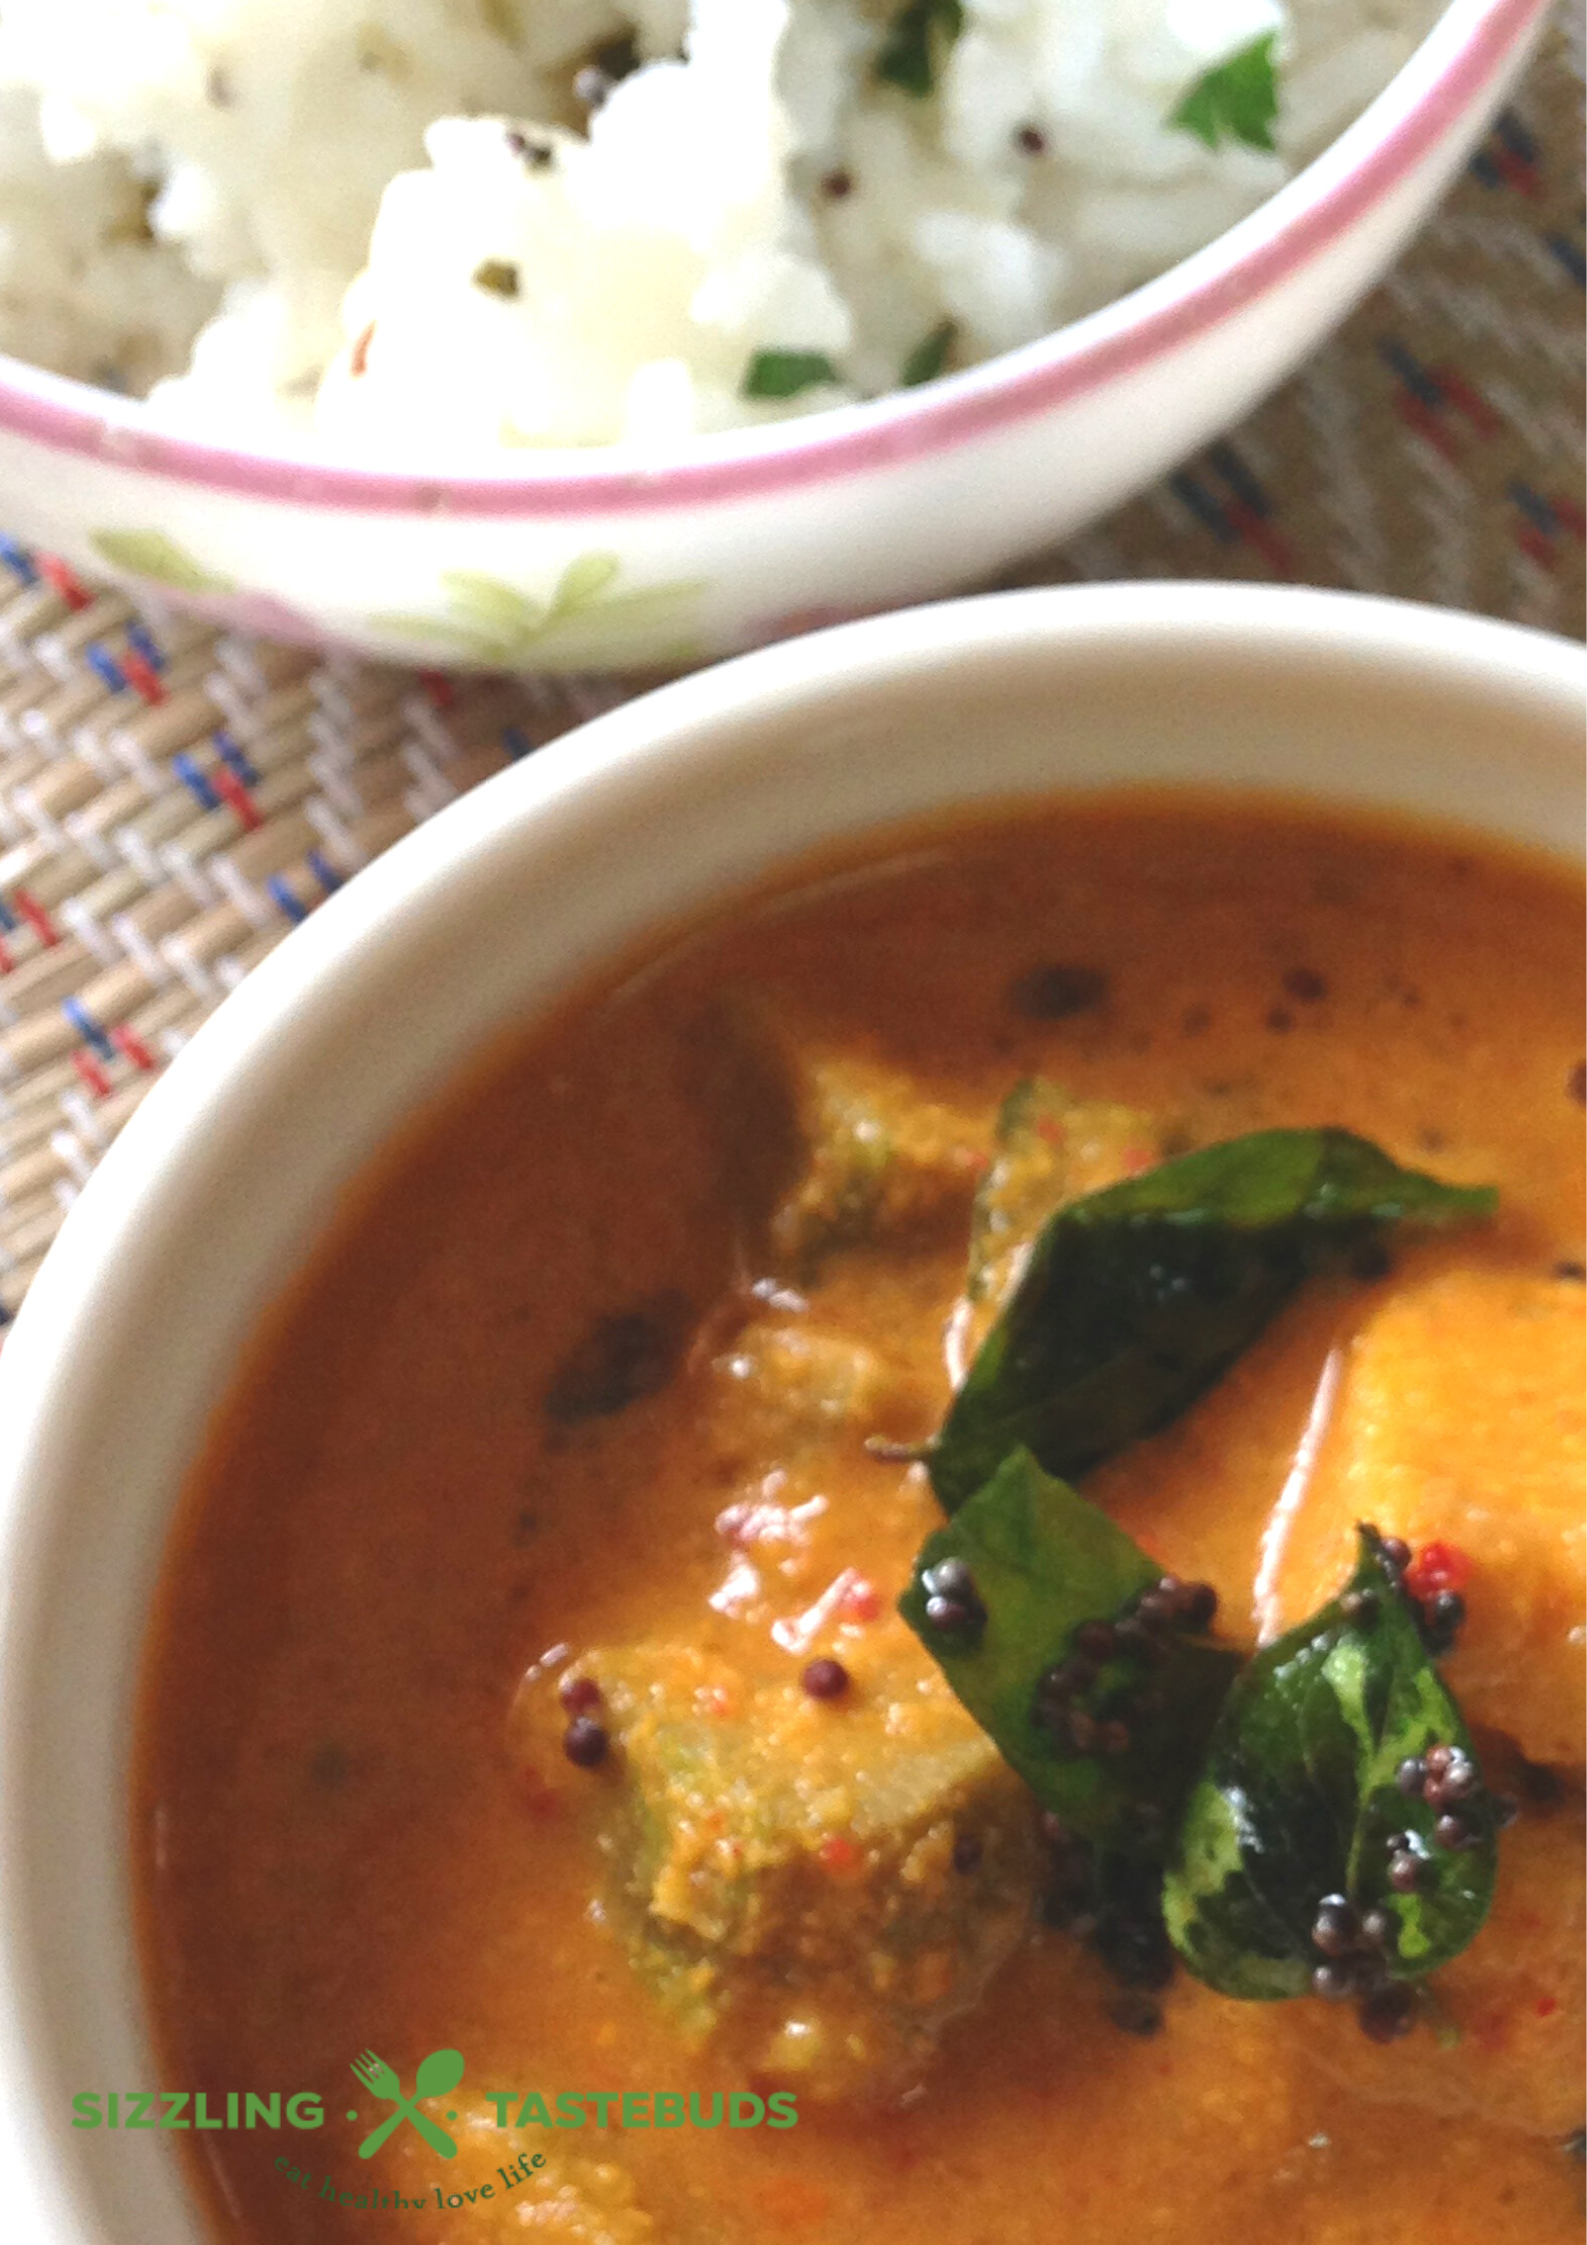 Balekayi Sasive or Sasam is a no onion no garlic Curry made with raw banana simmered in a mustard-coconut sauce. Enjoyed as a side to hot steamed rice in Udupi cuisine.